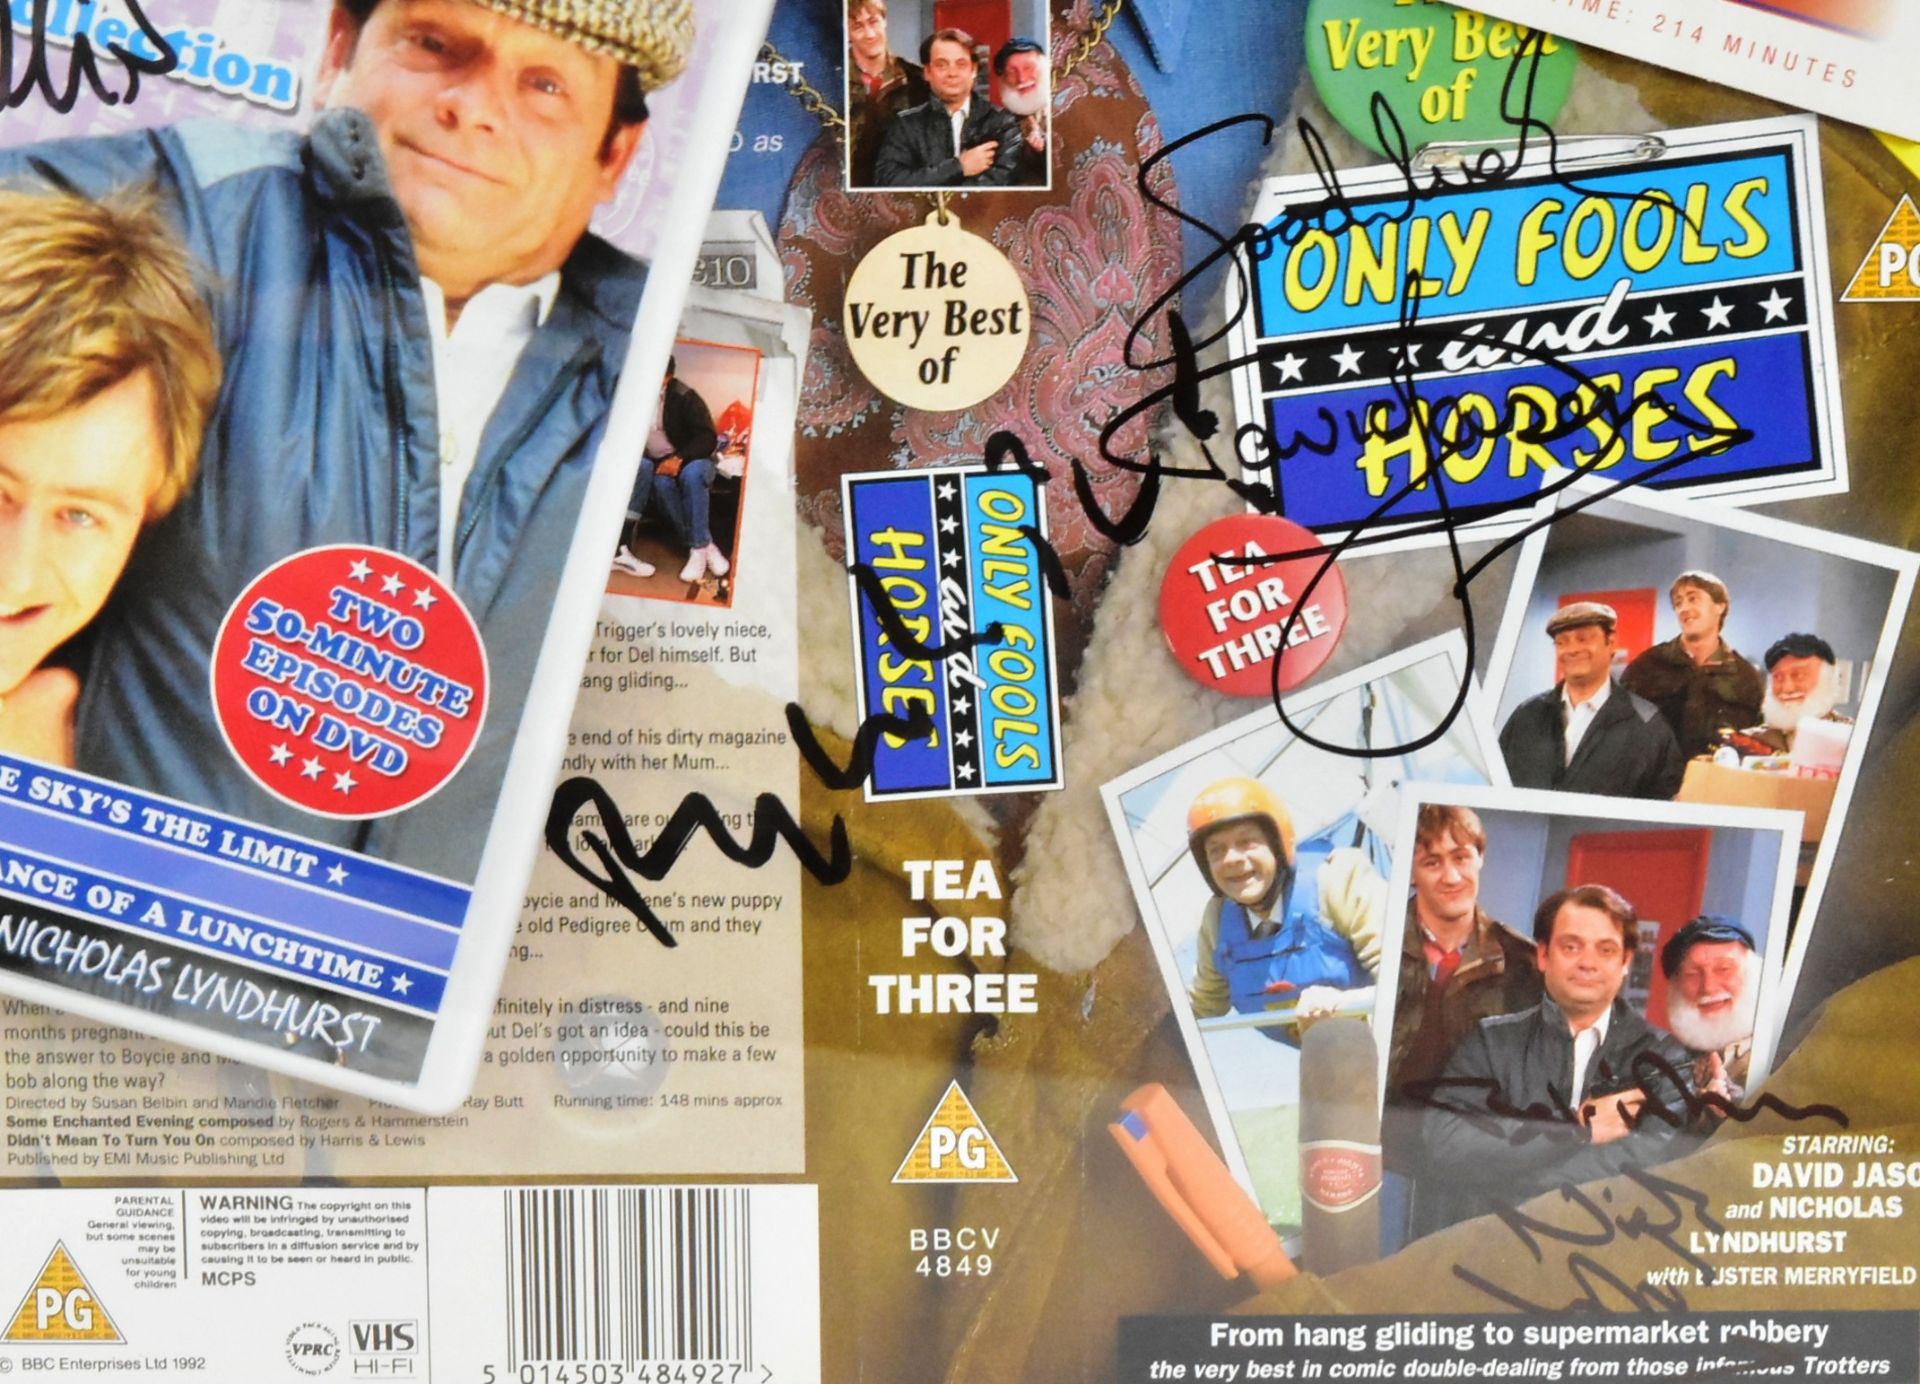 ONLY FOOLS & HORSES - CAST AUTOGRAPHED DISPLAY - Image 5 of 5